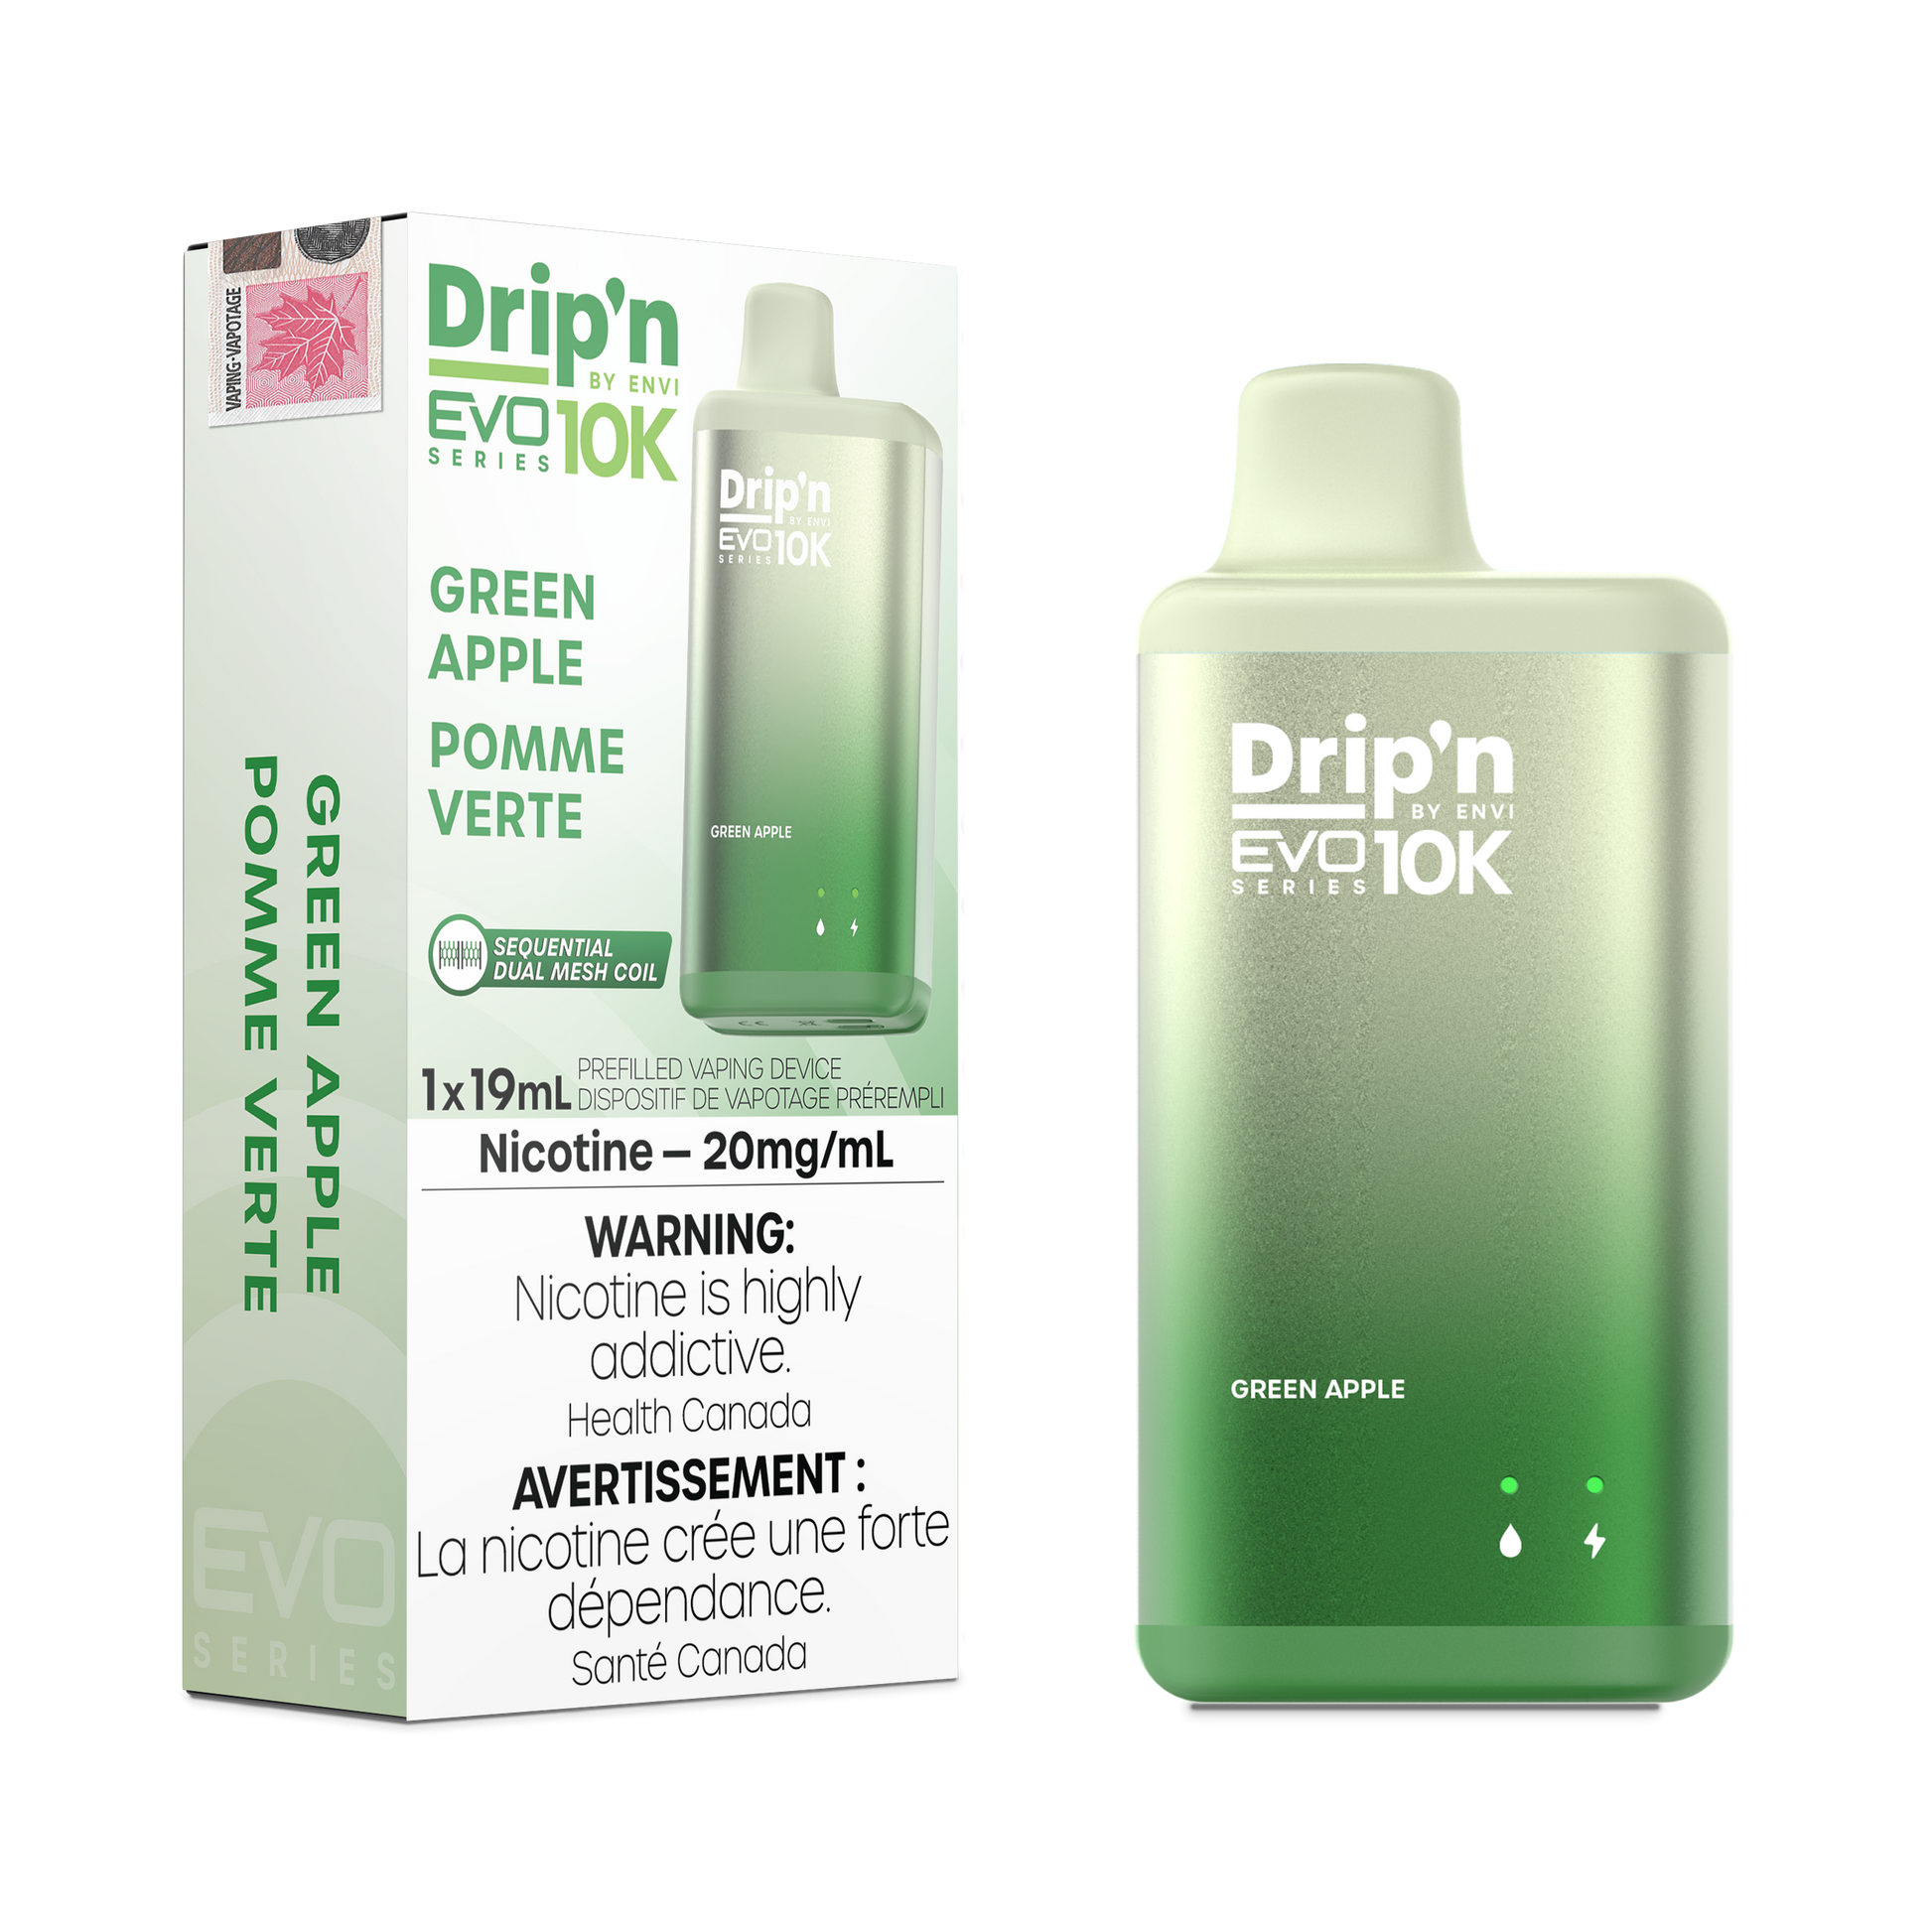 Envi Drip'n EVO 10K Green Apple Disposable Vape - Online Vape Shop Canada - Quebec and BC Shipping Available